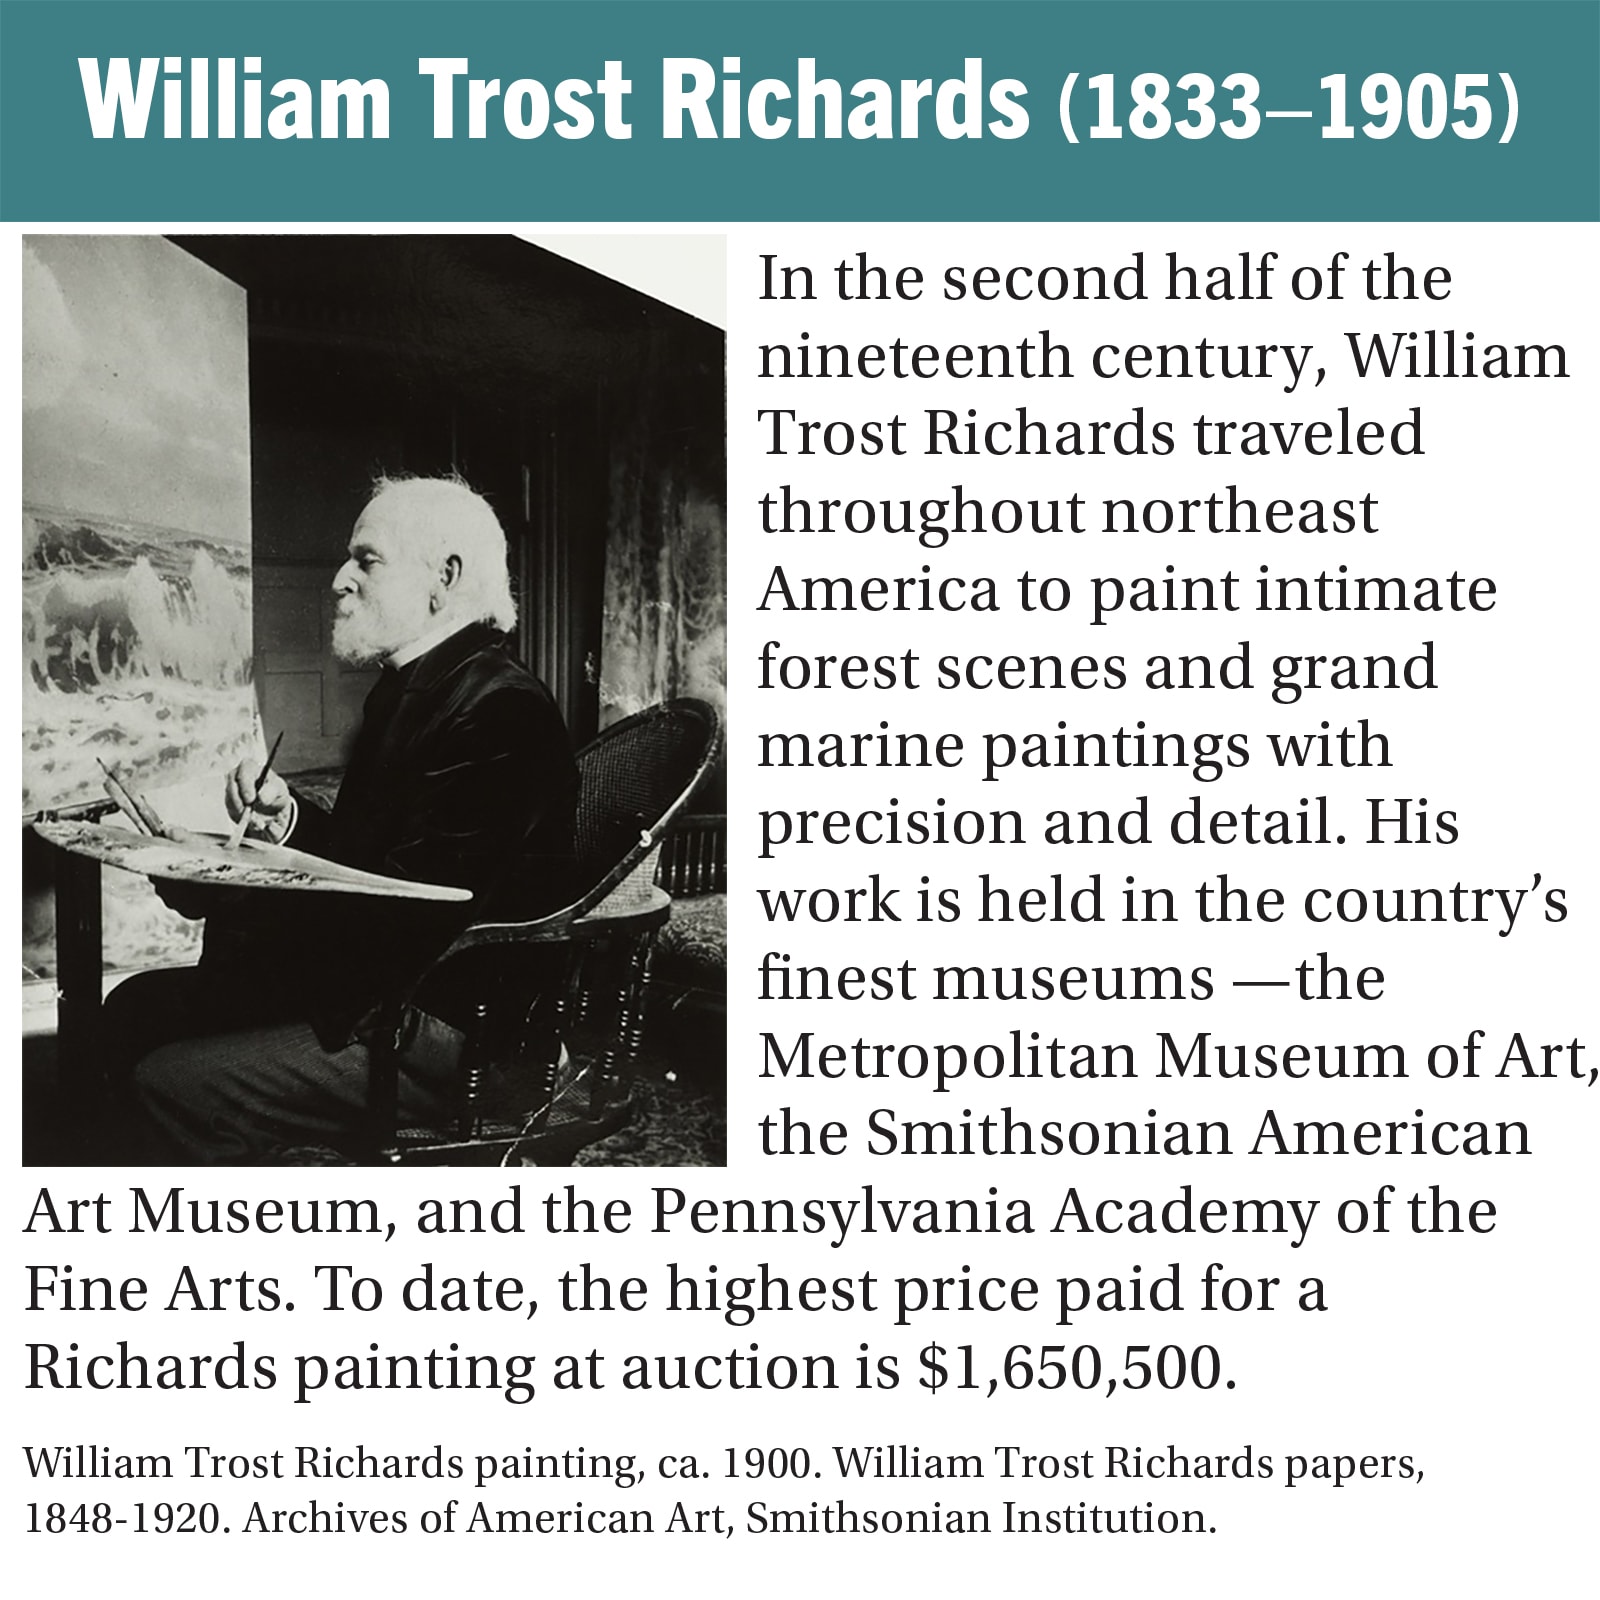 In the second half of the nineteenth century, William Trost Richards traveled throughout northeast America to paint intimate forest scenes and grand marine paintings with precision and detail. His work is held in the country’s finest museums —the Metropolitan Museum of Art, the Smithsonian American Art Museum, and the Pennsylvania Academy of the Fine Arts. To date, the highest price paid for a Richards painting at auction is $1,650,500. William Trost Richards painting, ca. 1900. William Trost Richards papers, 1848-1920. Archives of American Art, Smithsonian Institution.